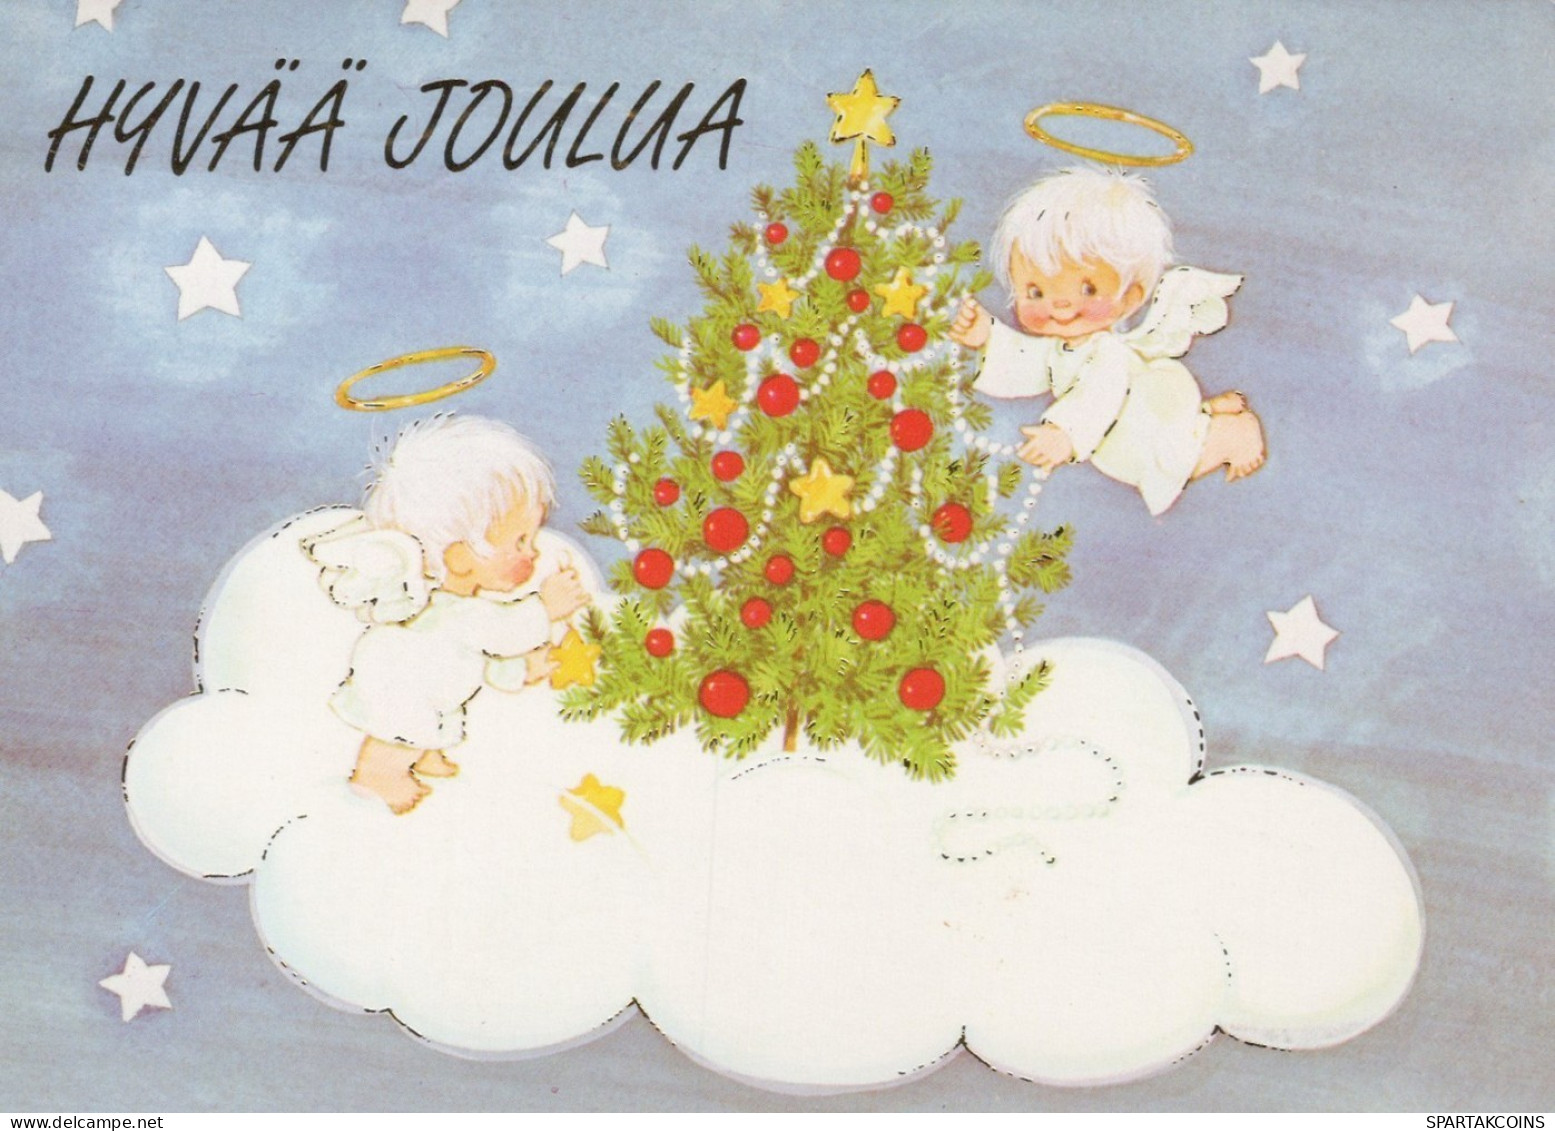 ANGELO Buon Anno Natale Vintage Cartolina CPSM #PAH015.IT - Angels